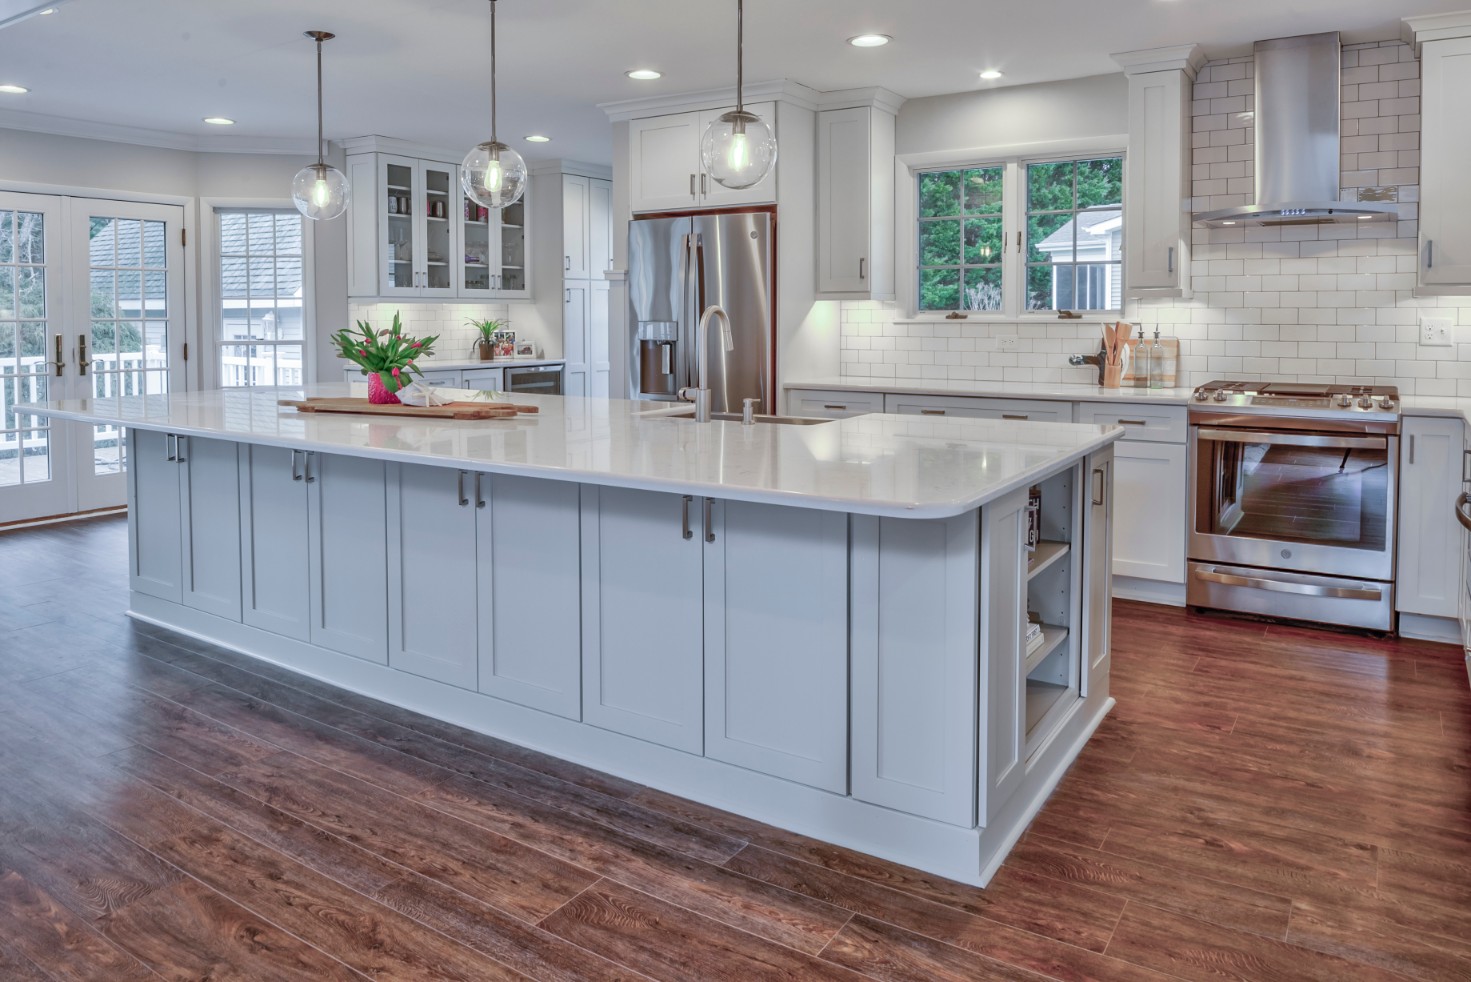 Canal Way Renovation in Bethany Beach DE - Kitchen with Center Island